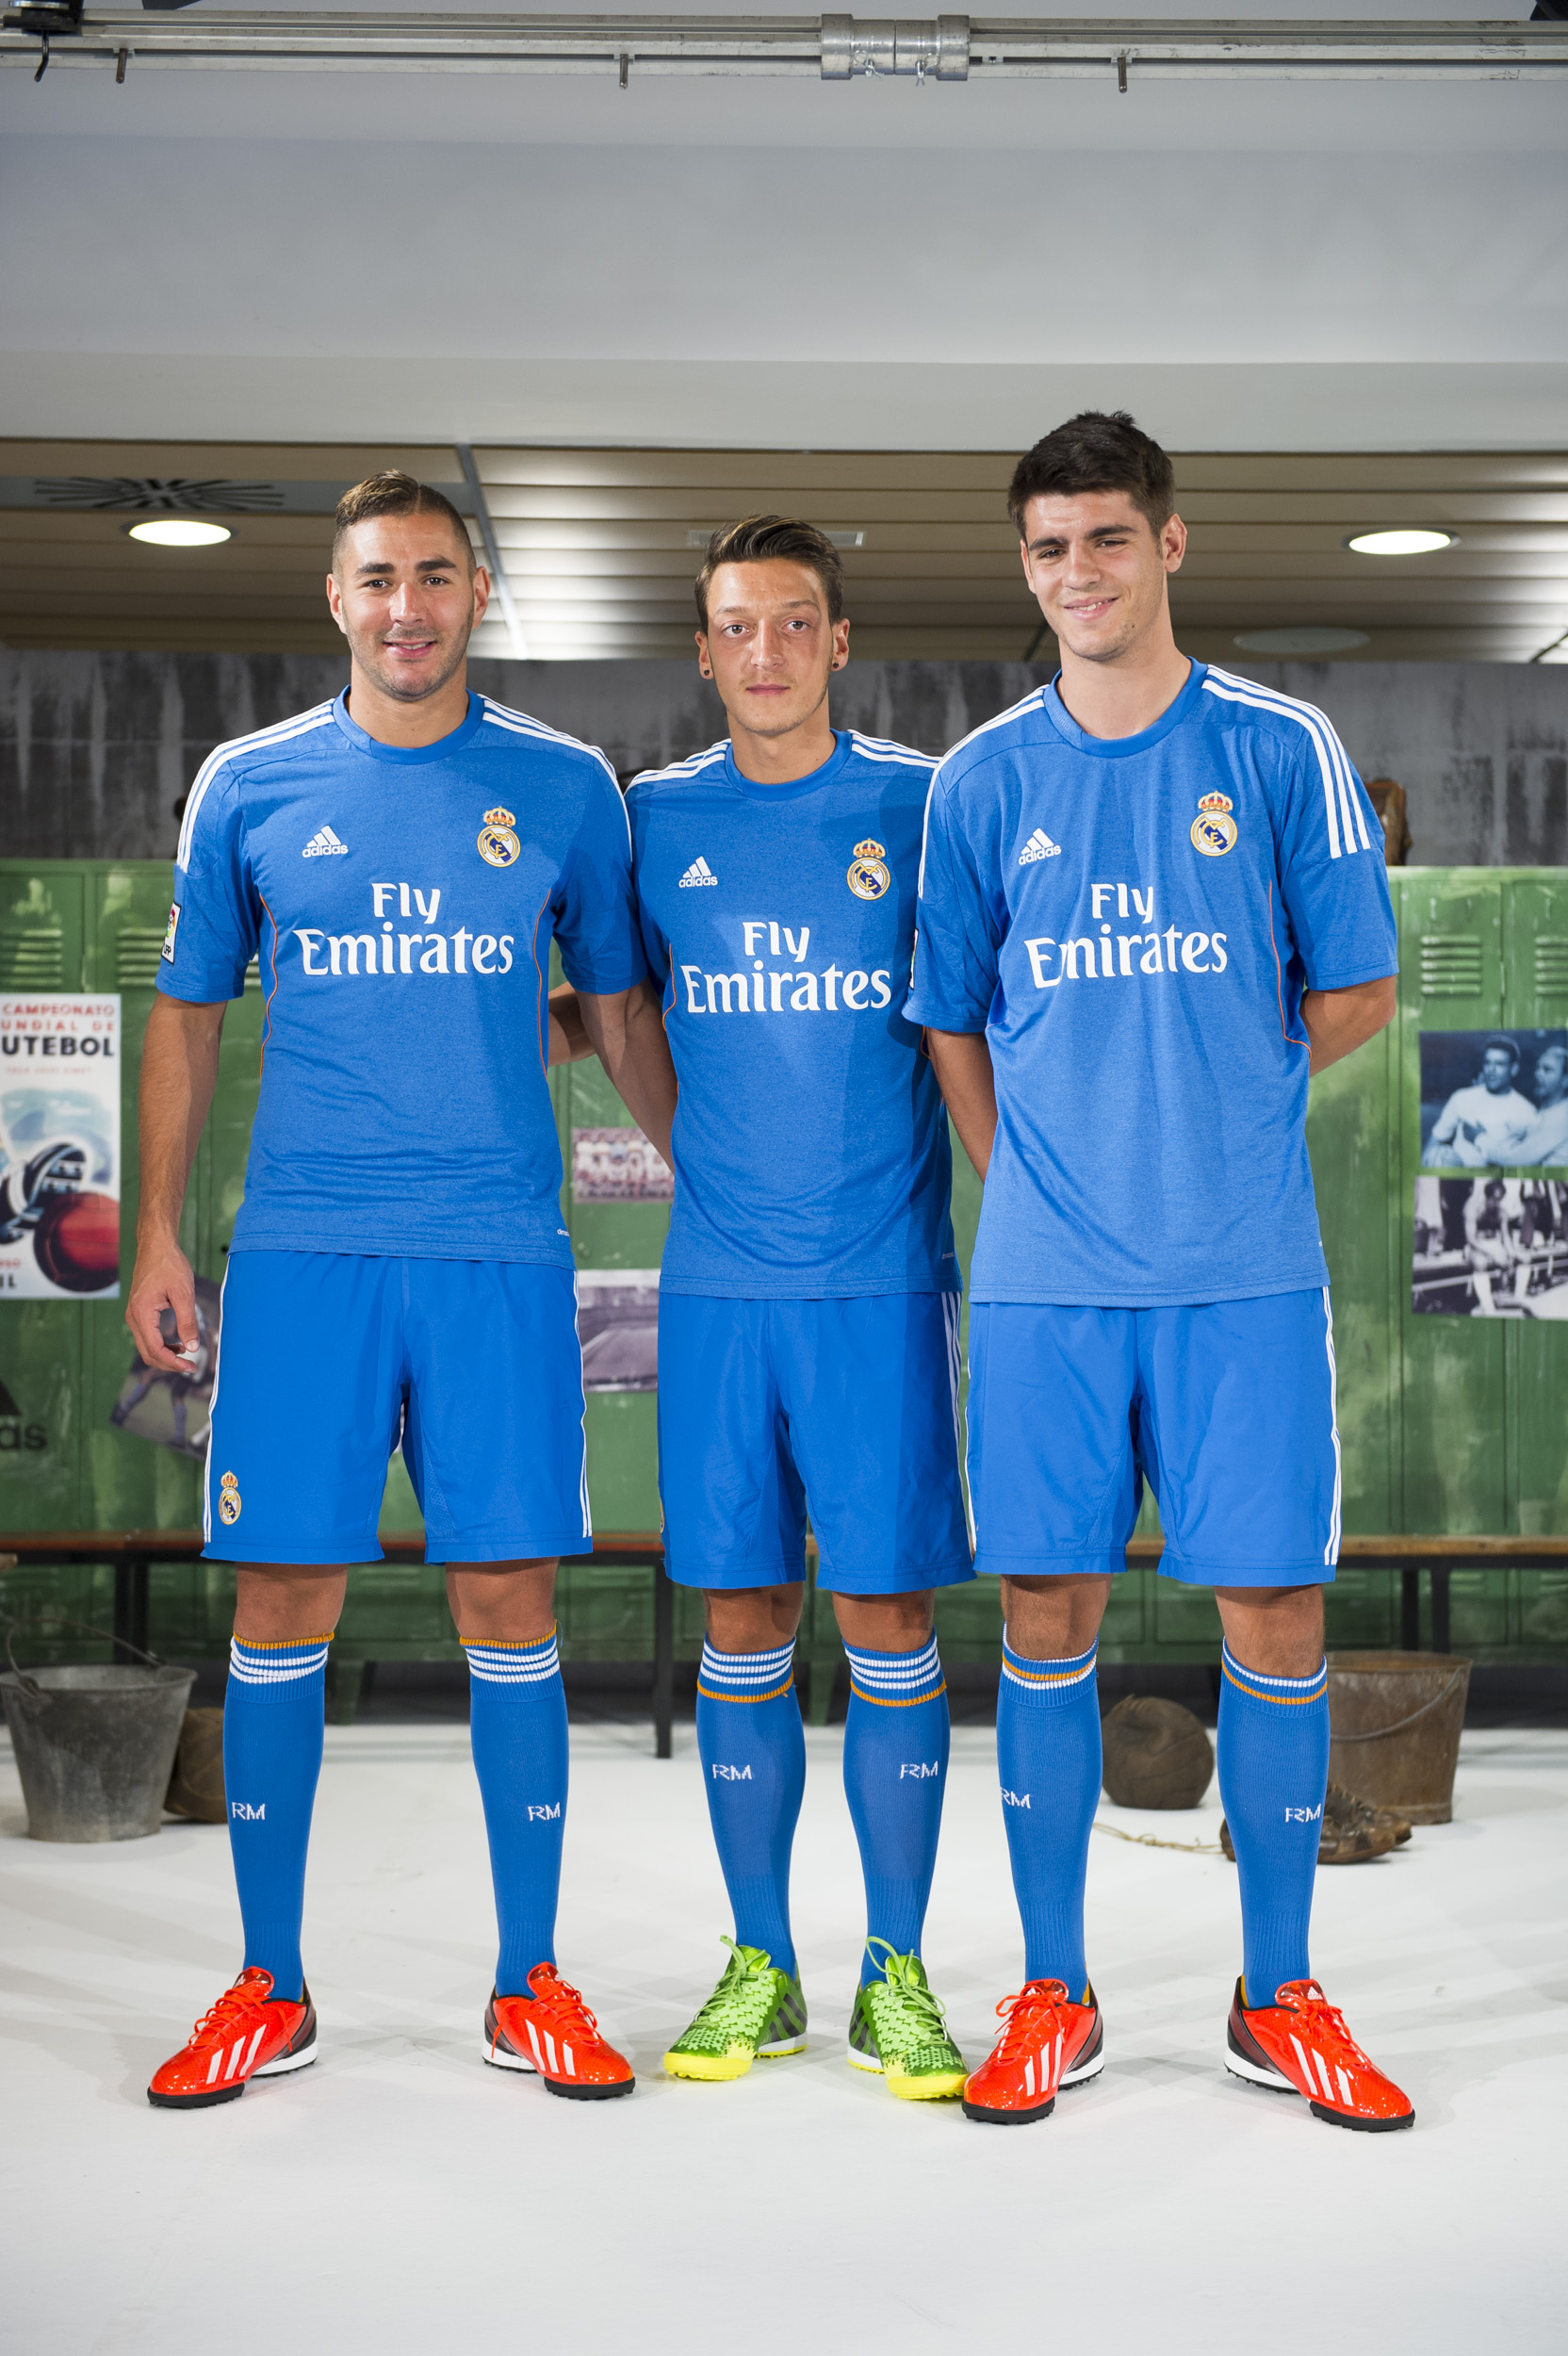 real madrid jerseys through the years